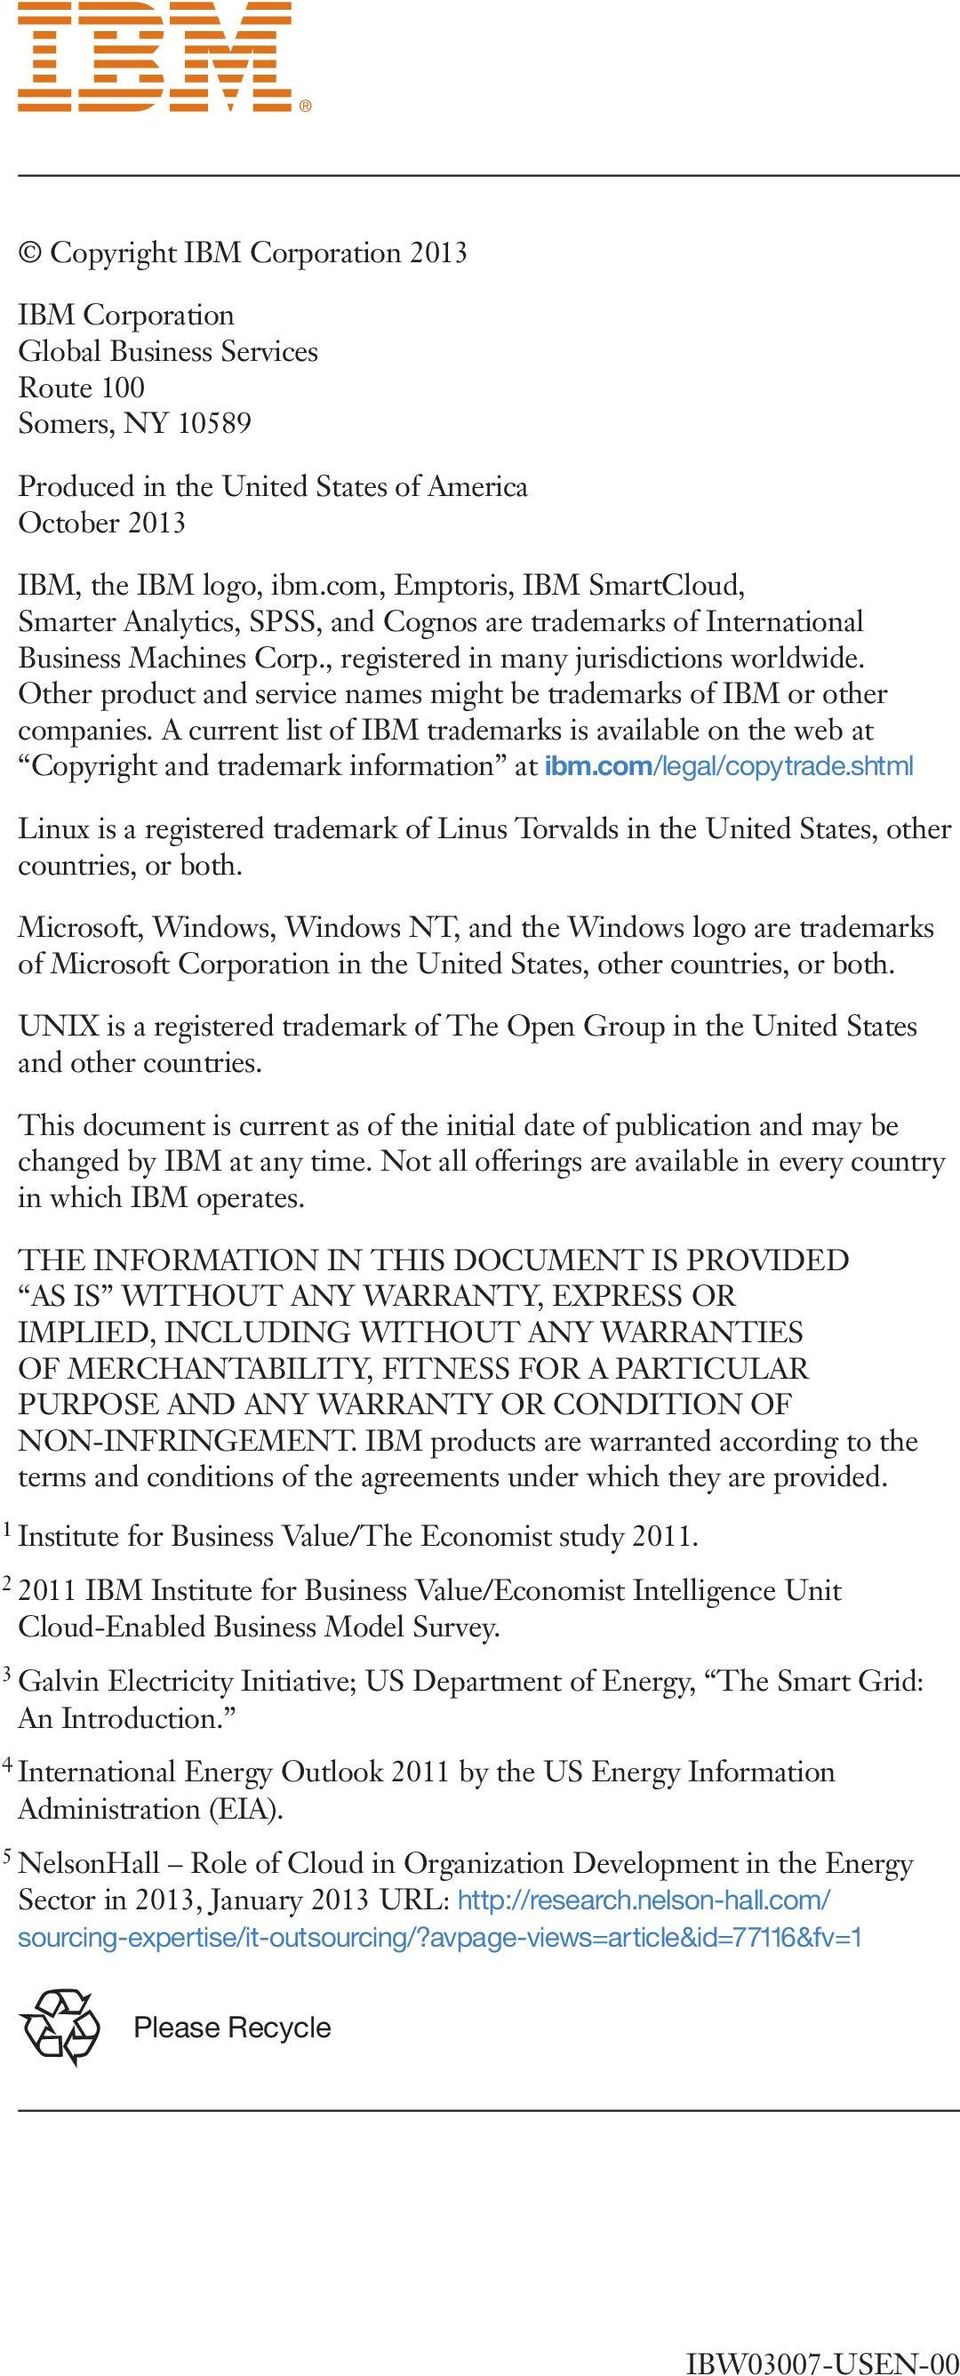 Other product and service names might be trademarks of IBM or other companies. A current list of IBM trademarks is available on the web at Copyright and trademark information at ibm.